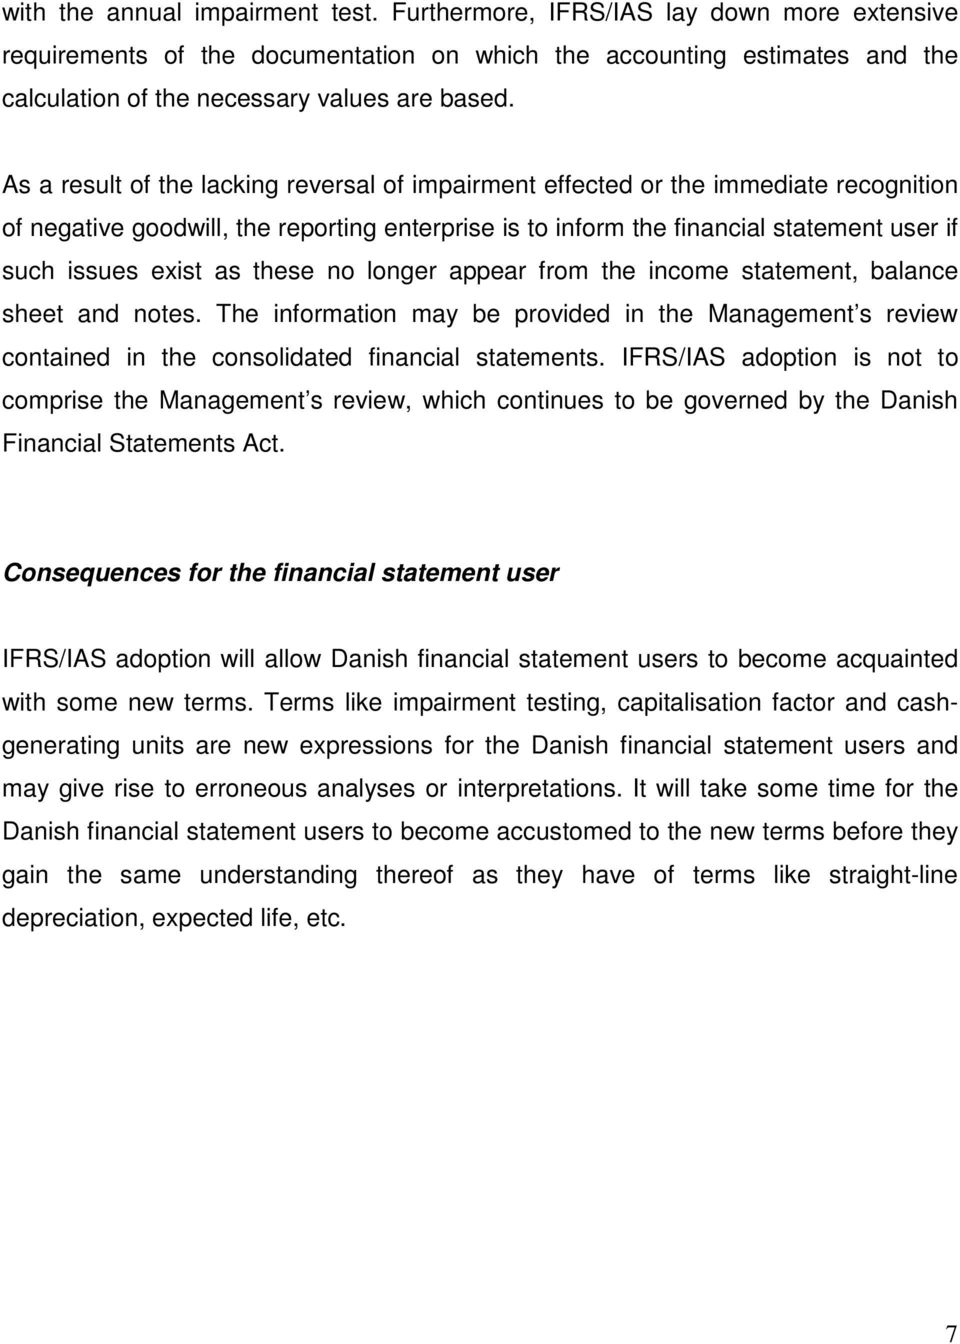 As a result of the lacking reversal of impairment effected or the immediate recognition of negative goodwill, the reporting enterprise is to inform the financial statement user if such issues exist